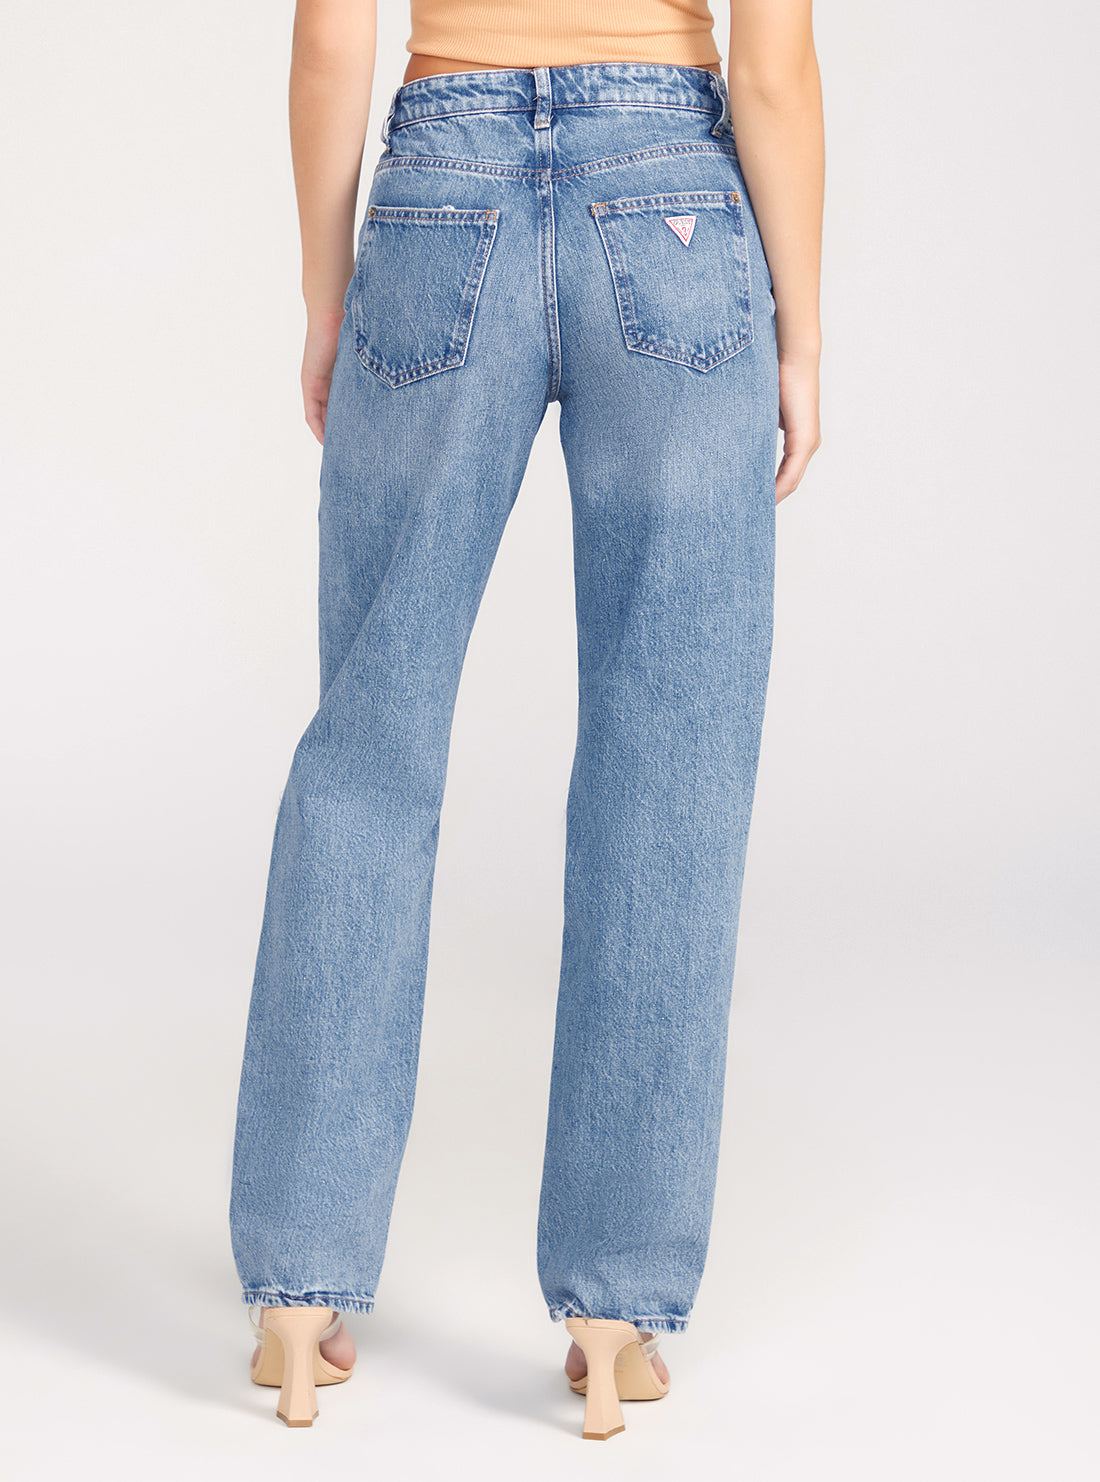 GUESS Mid-Rise Relaxed Straight Leg Jeans In Light Wash back view